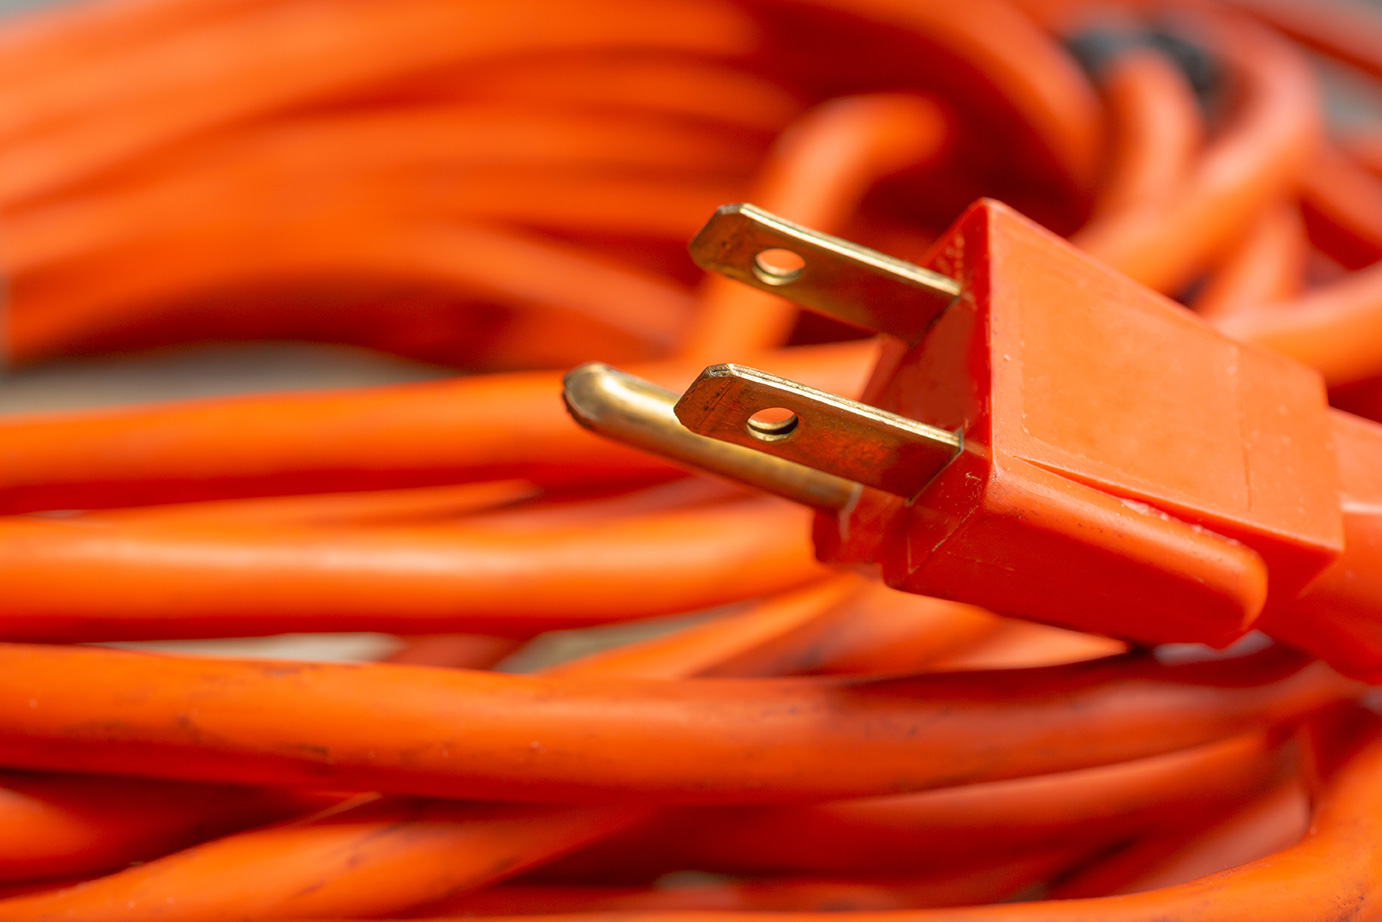 Electrical Safety: Choosing the Right Extension Cord - Grainger KnowHow